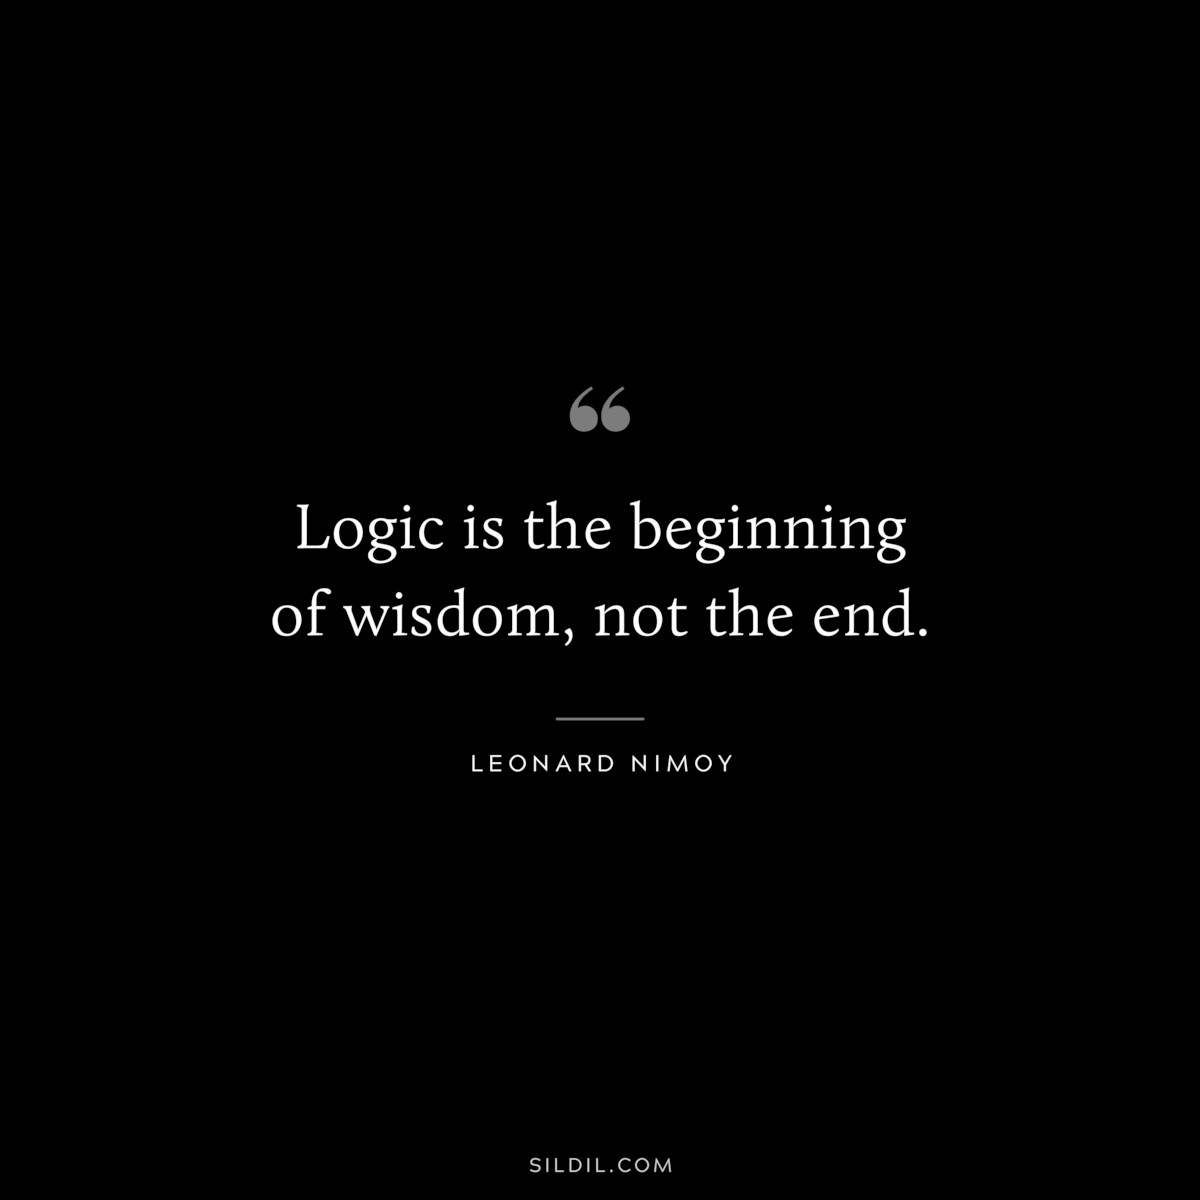 Logic is the beginning of wisdom, not the end. ― Leonard Nimoy